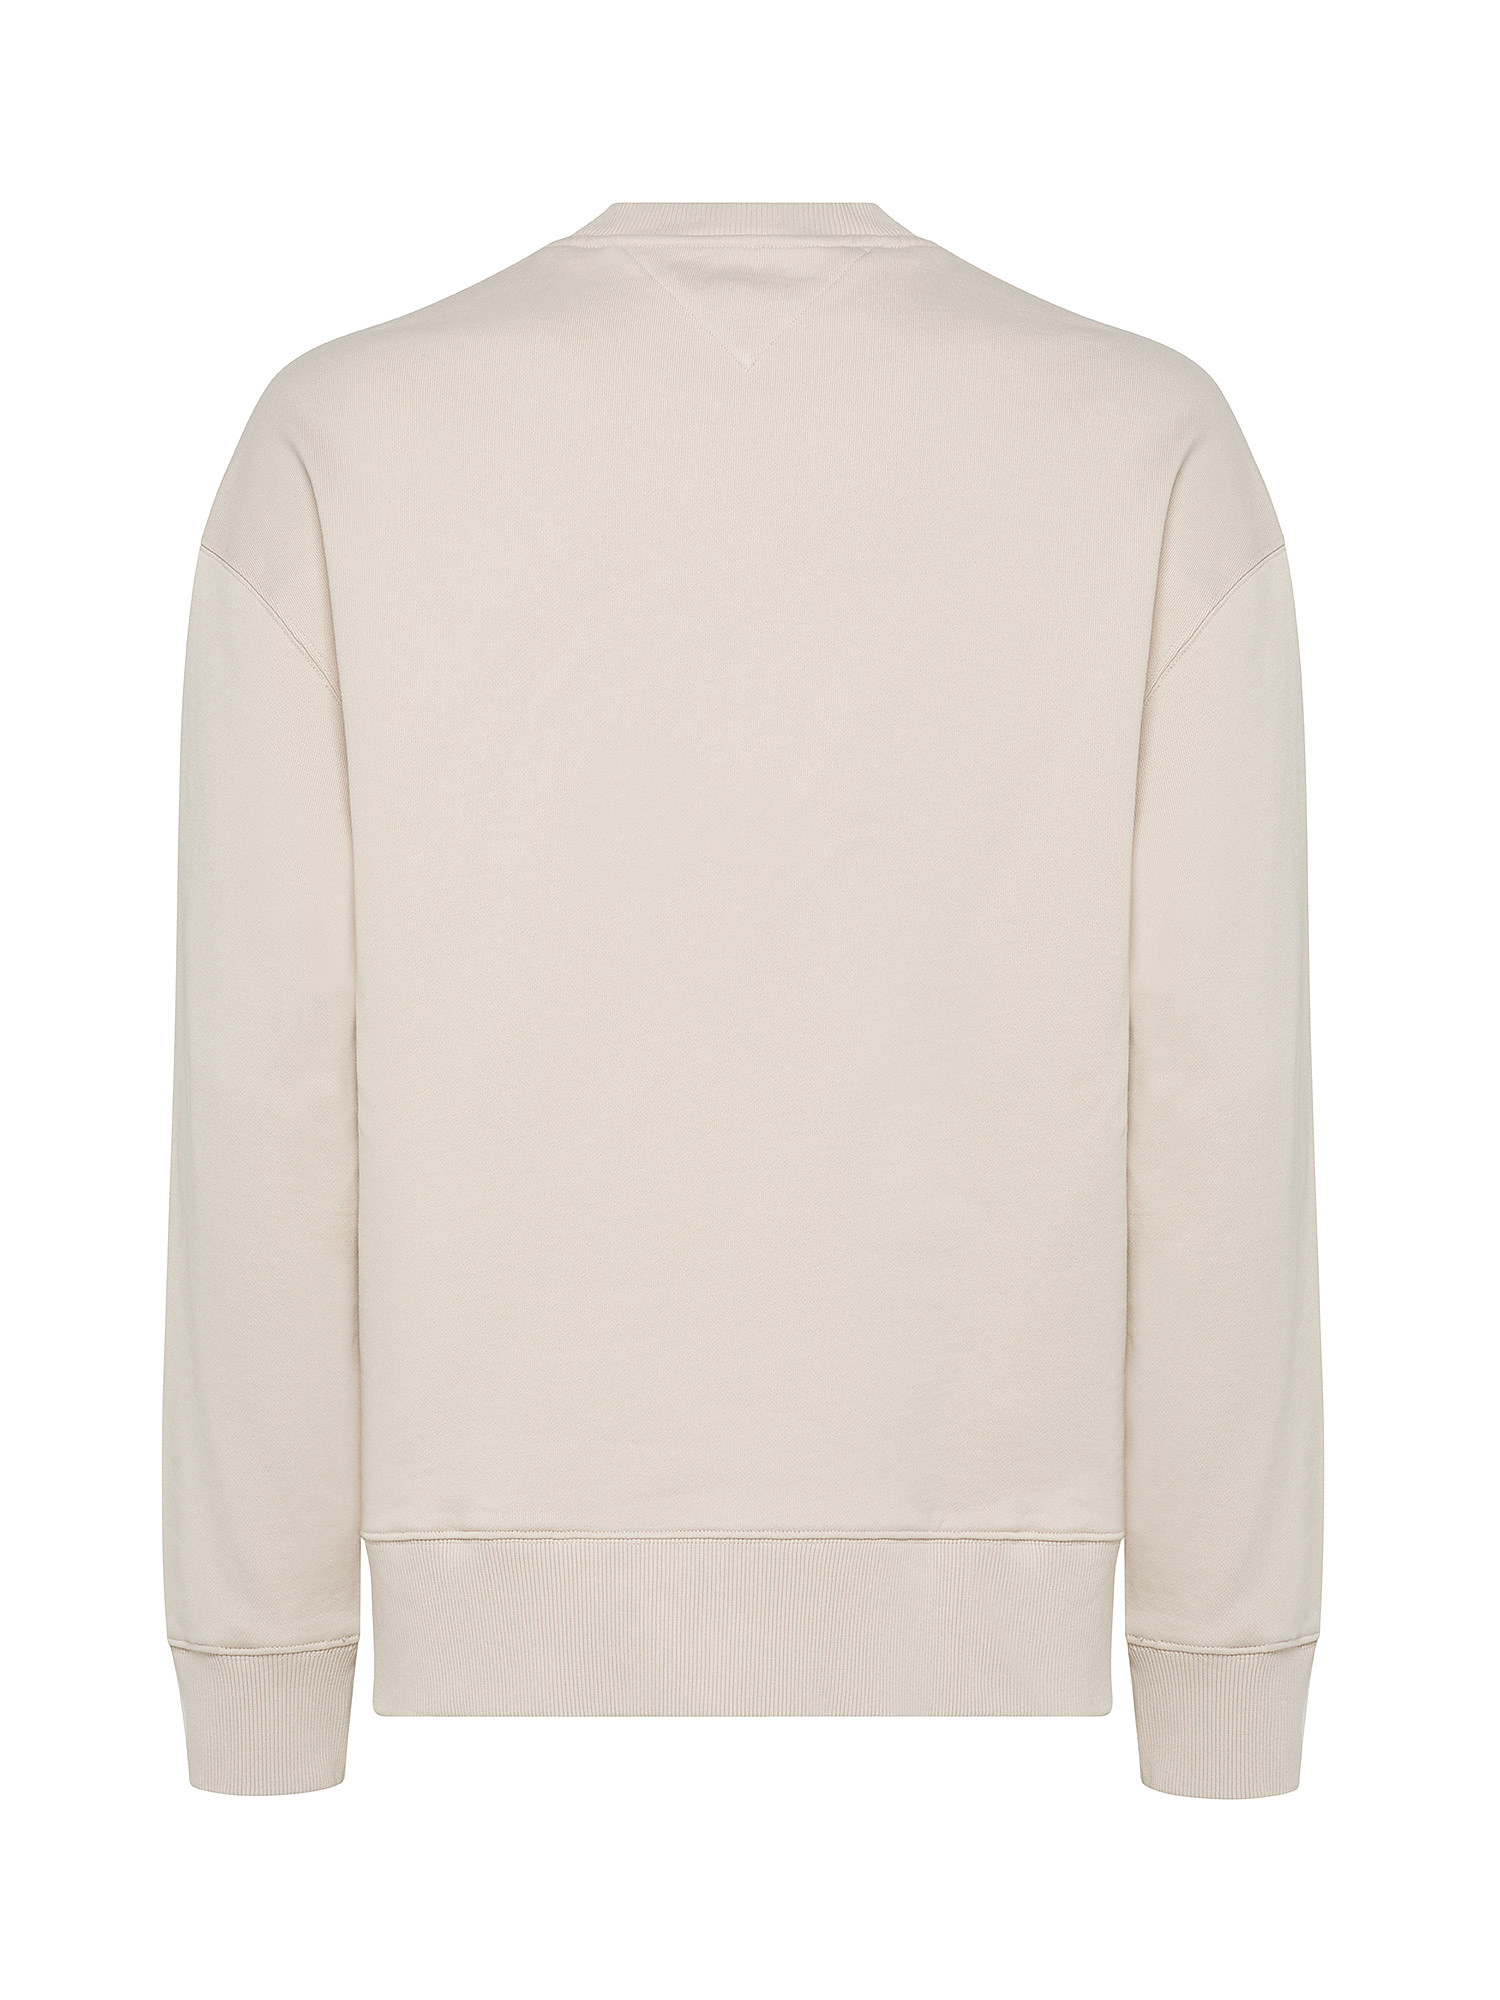 Tommy Jeans - Felpa relaxed fit in cotone con logo, Bianco avorio, large image number 1